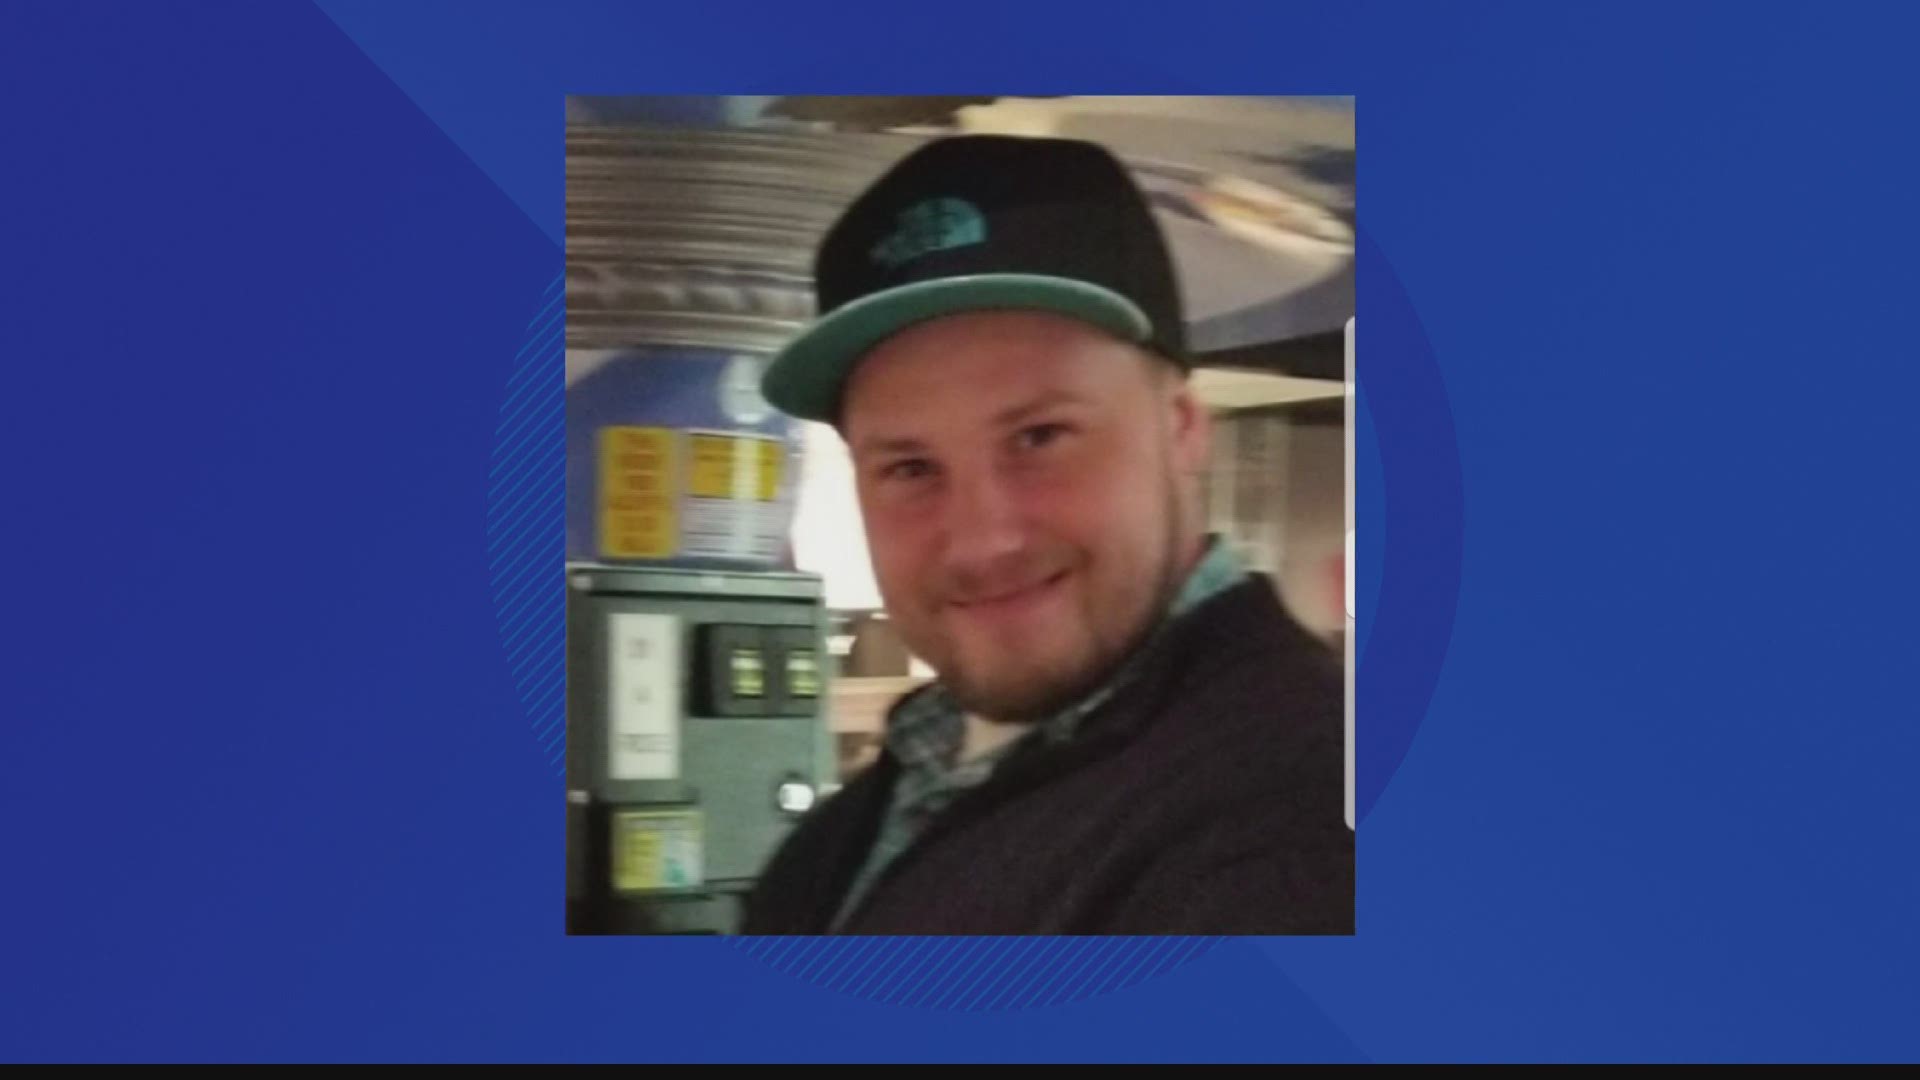 A woman isn't giving up the search for her 31-year-old son, who police say walked out of Methodist Hospital with a brain injury.